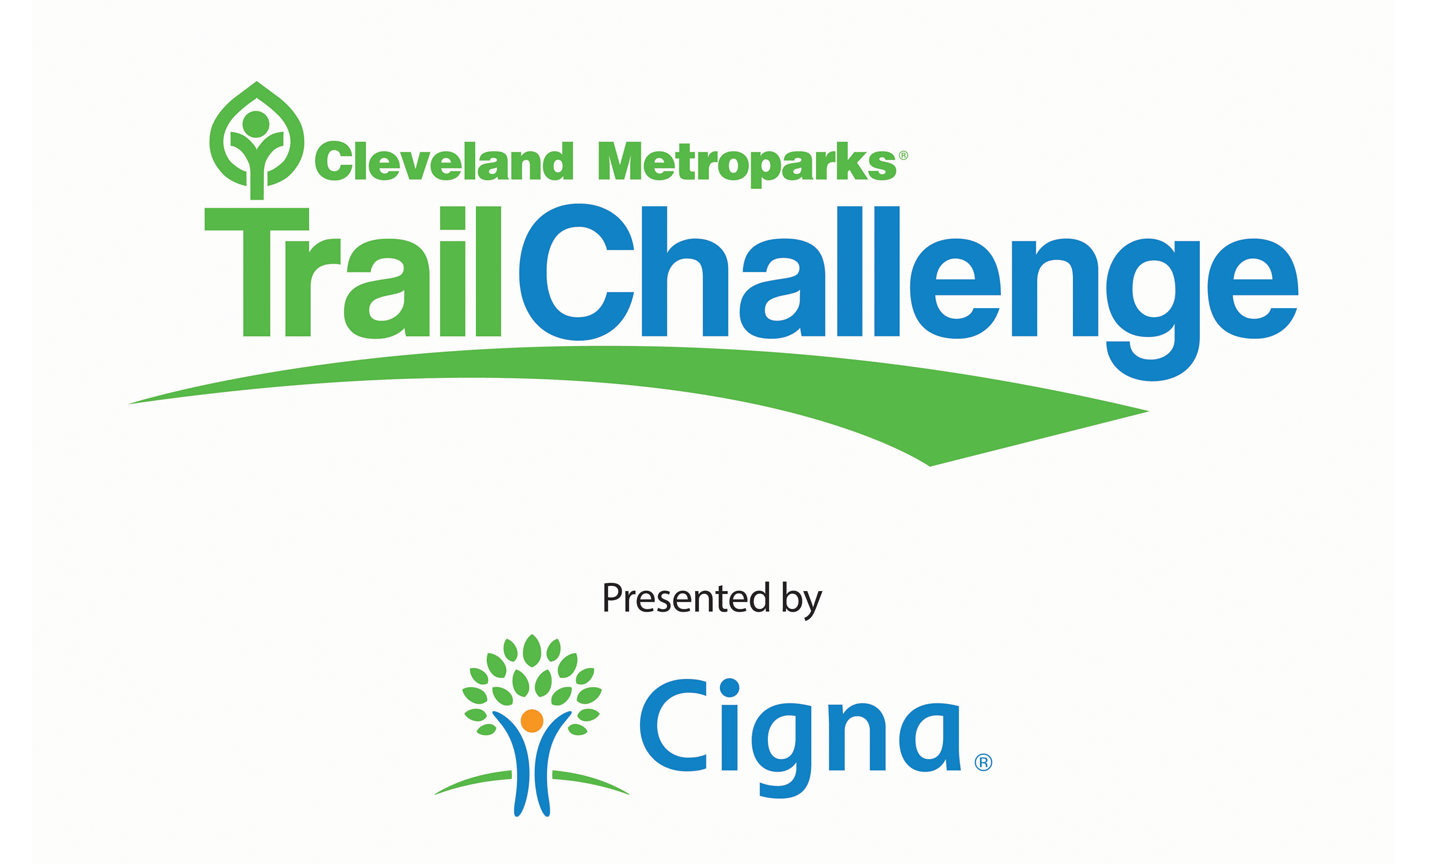 Cleveland Metroparks Trail Challenge Presented by Cigna